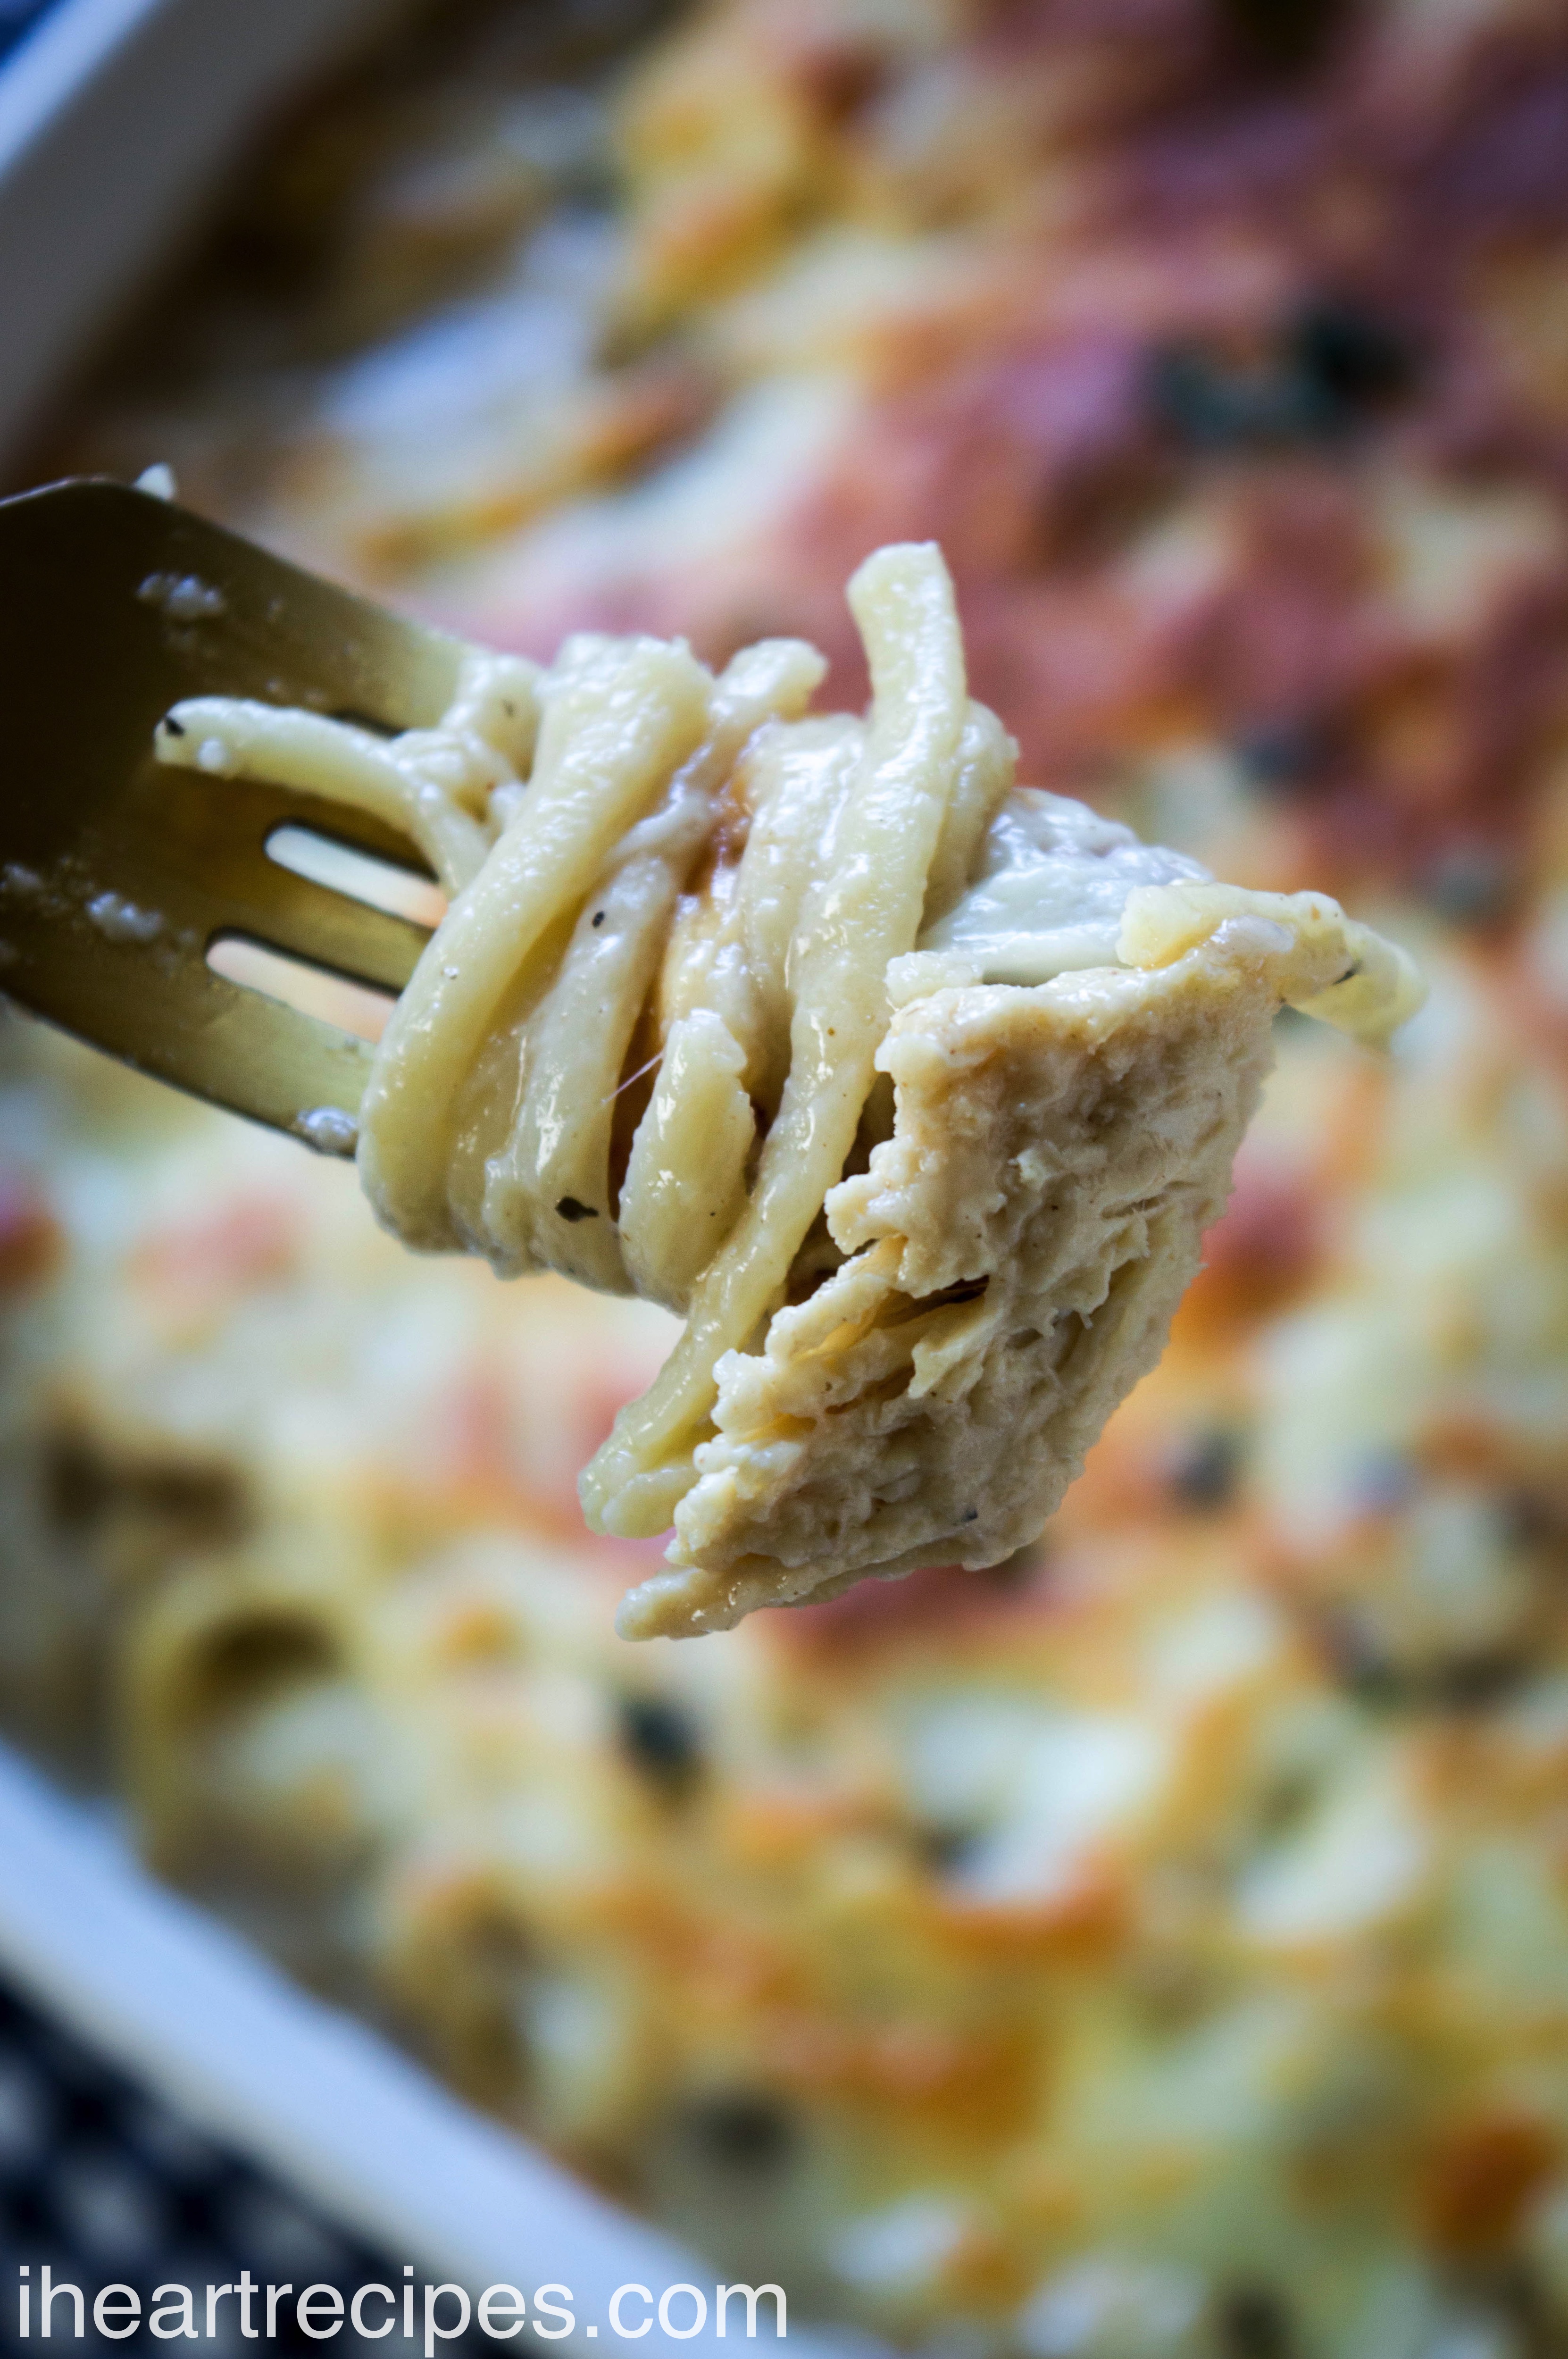 Creamy Chicken Tetrazzini is delicately wrapped around a fork, the perfect savory, tender bite!